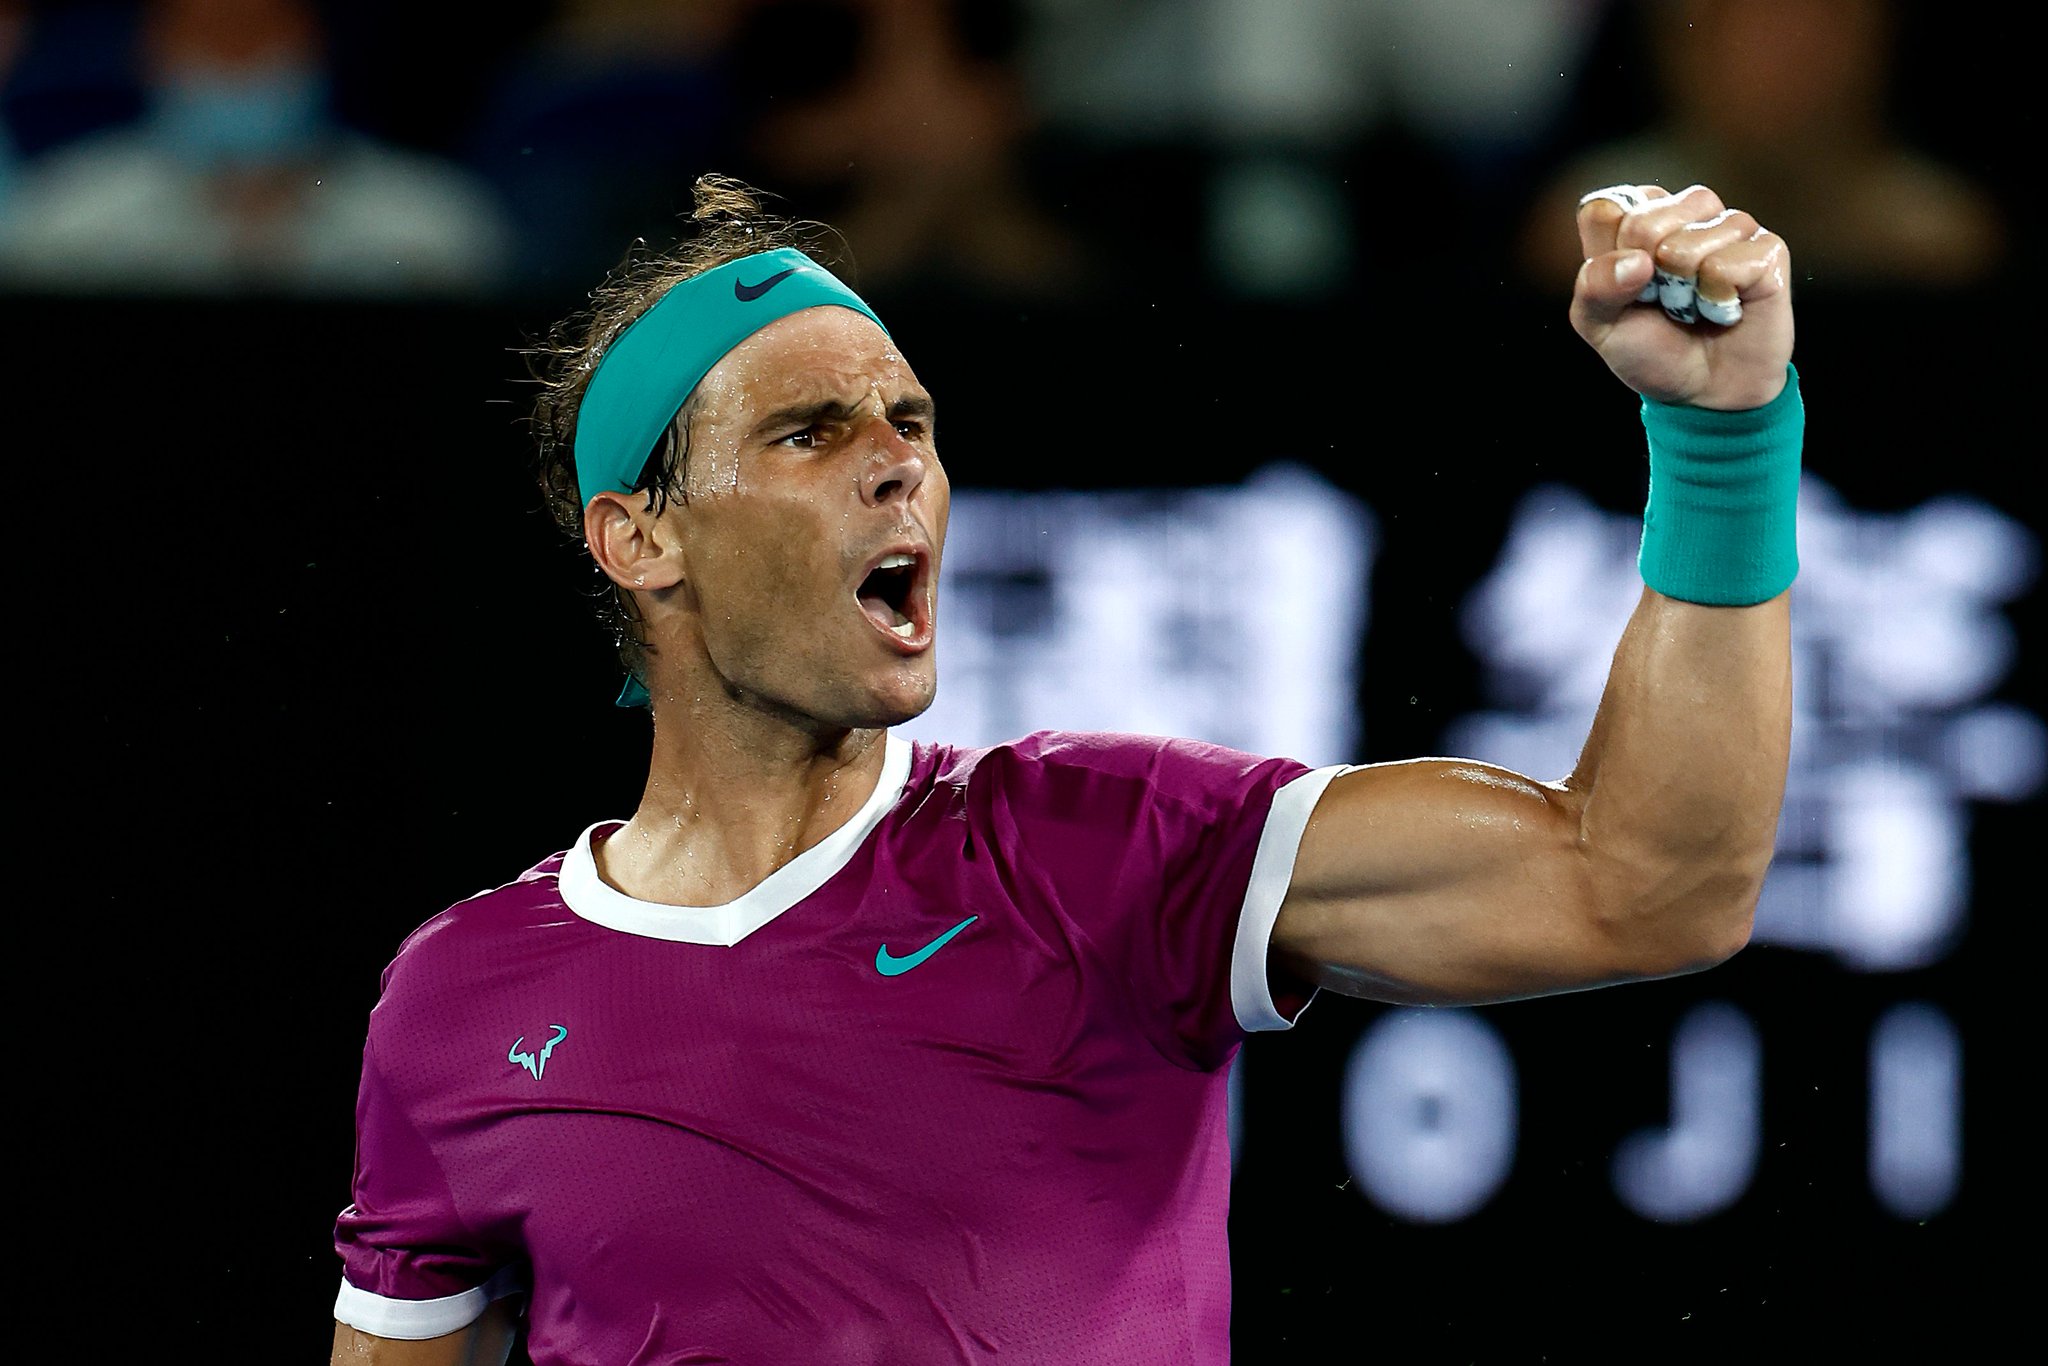 Australian Open: Rafael Nadal Becomes First Man Ever To Claim 21 Grand Slam Titles By Defeating Daniil Medvedev